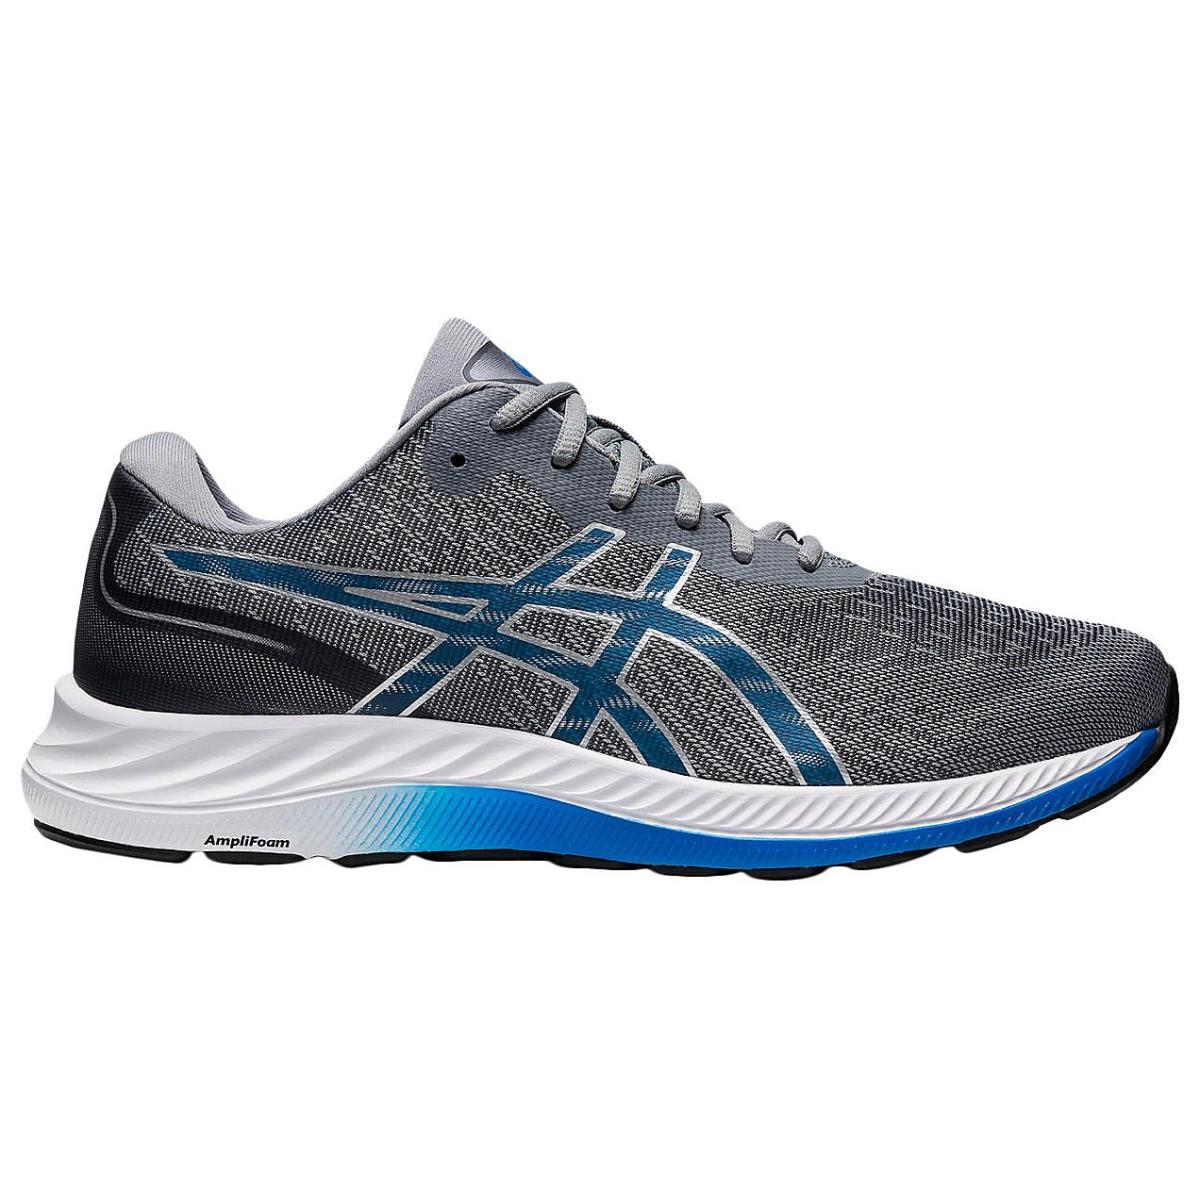 Asics Mens Gel Excite 9 Running Shoes Gray/Blue